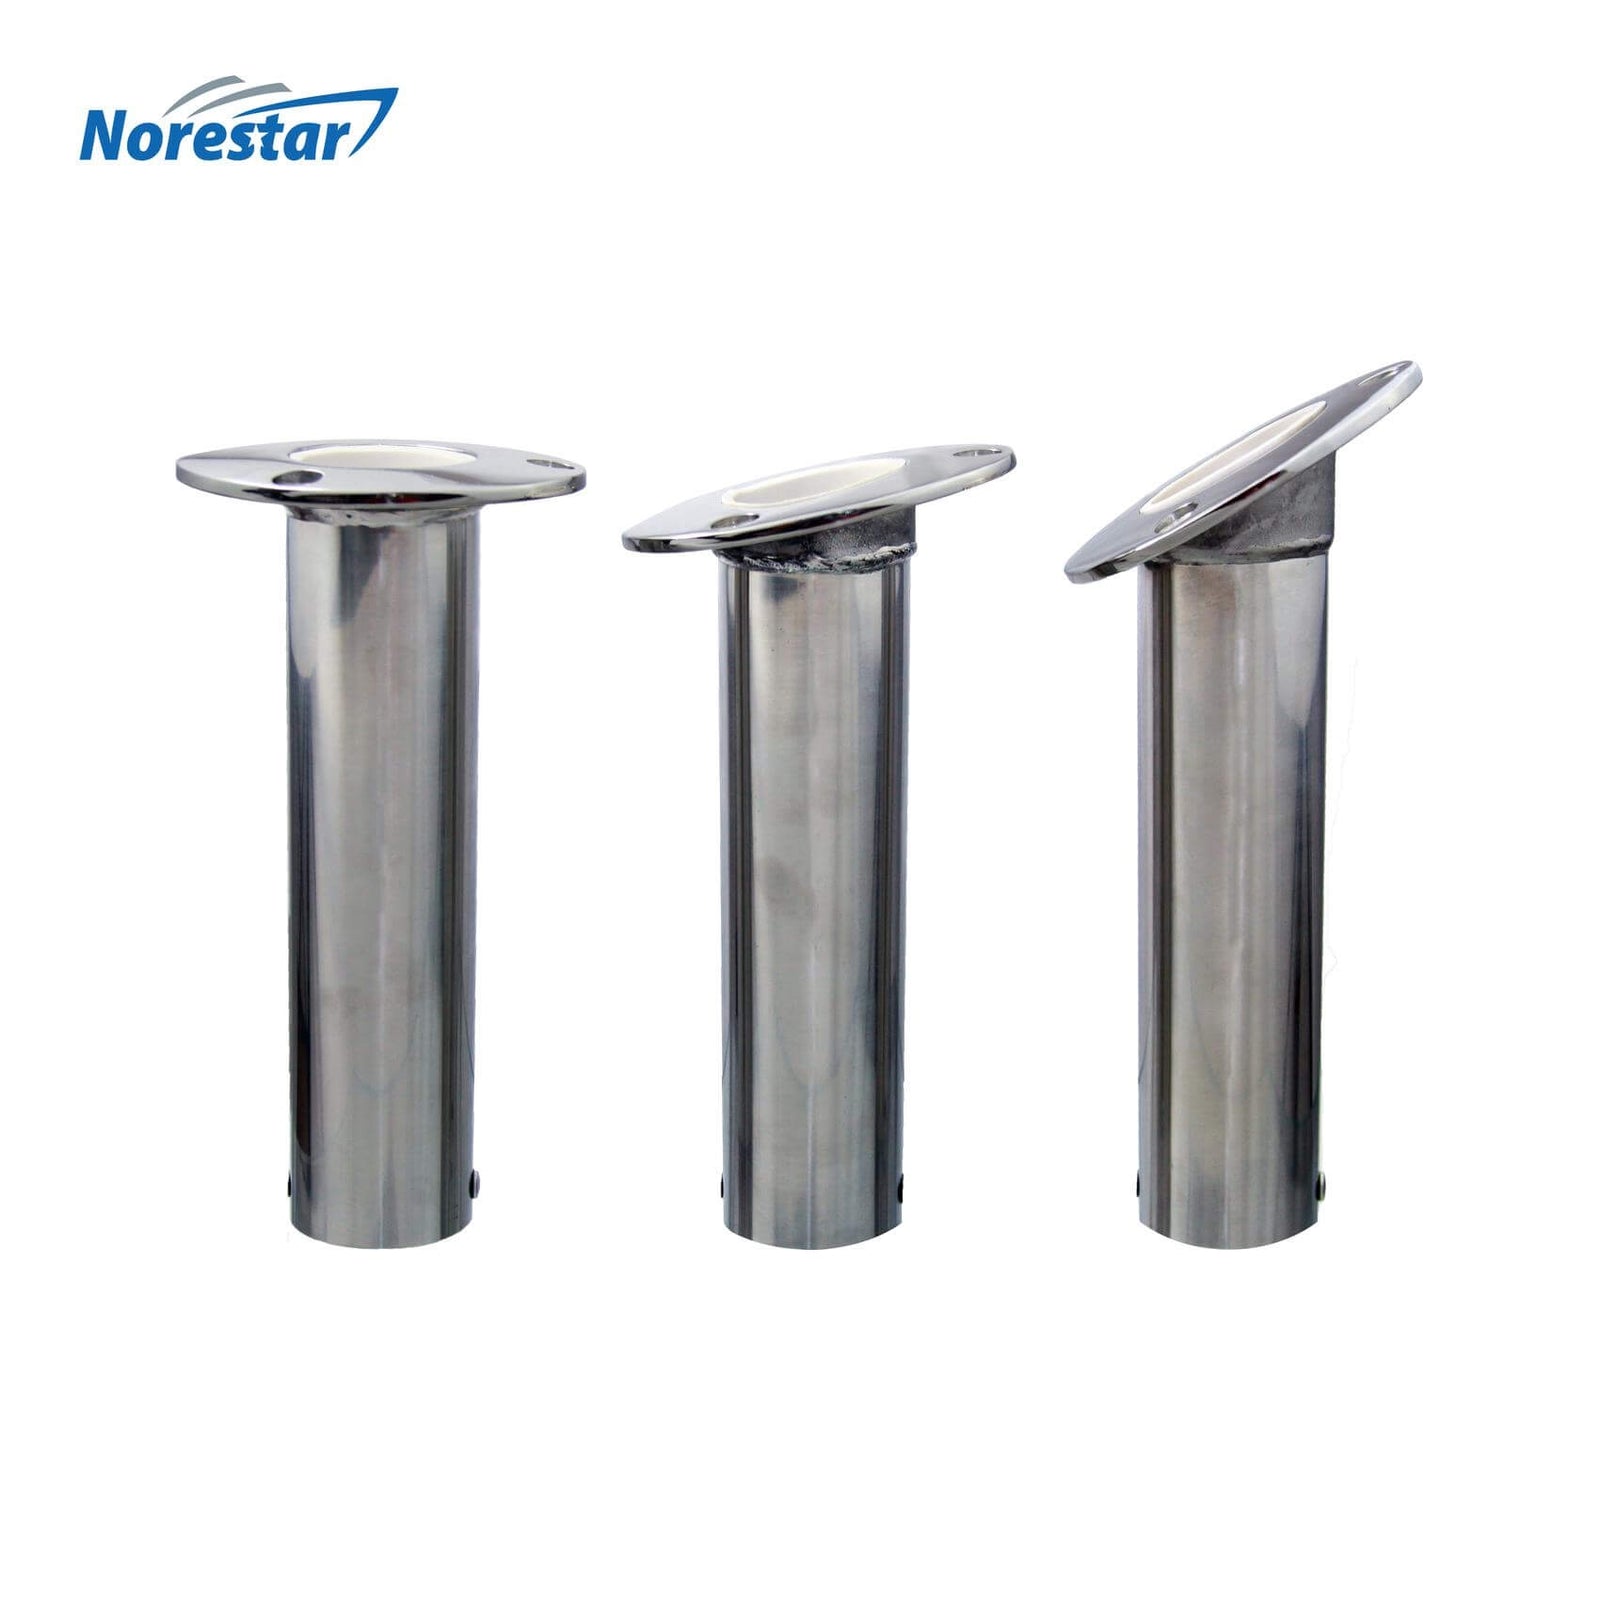 2 Dia x 0° Degree Closed End Stainless Steel Rod Holder